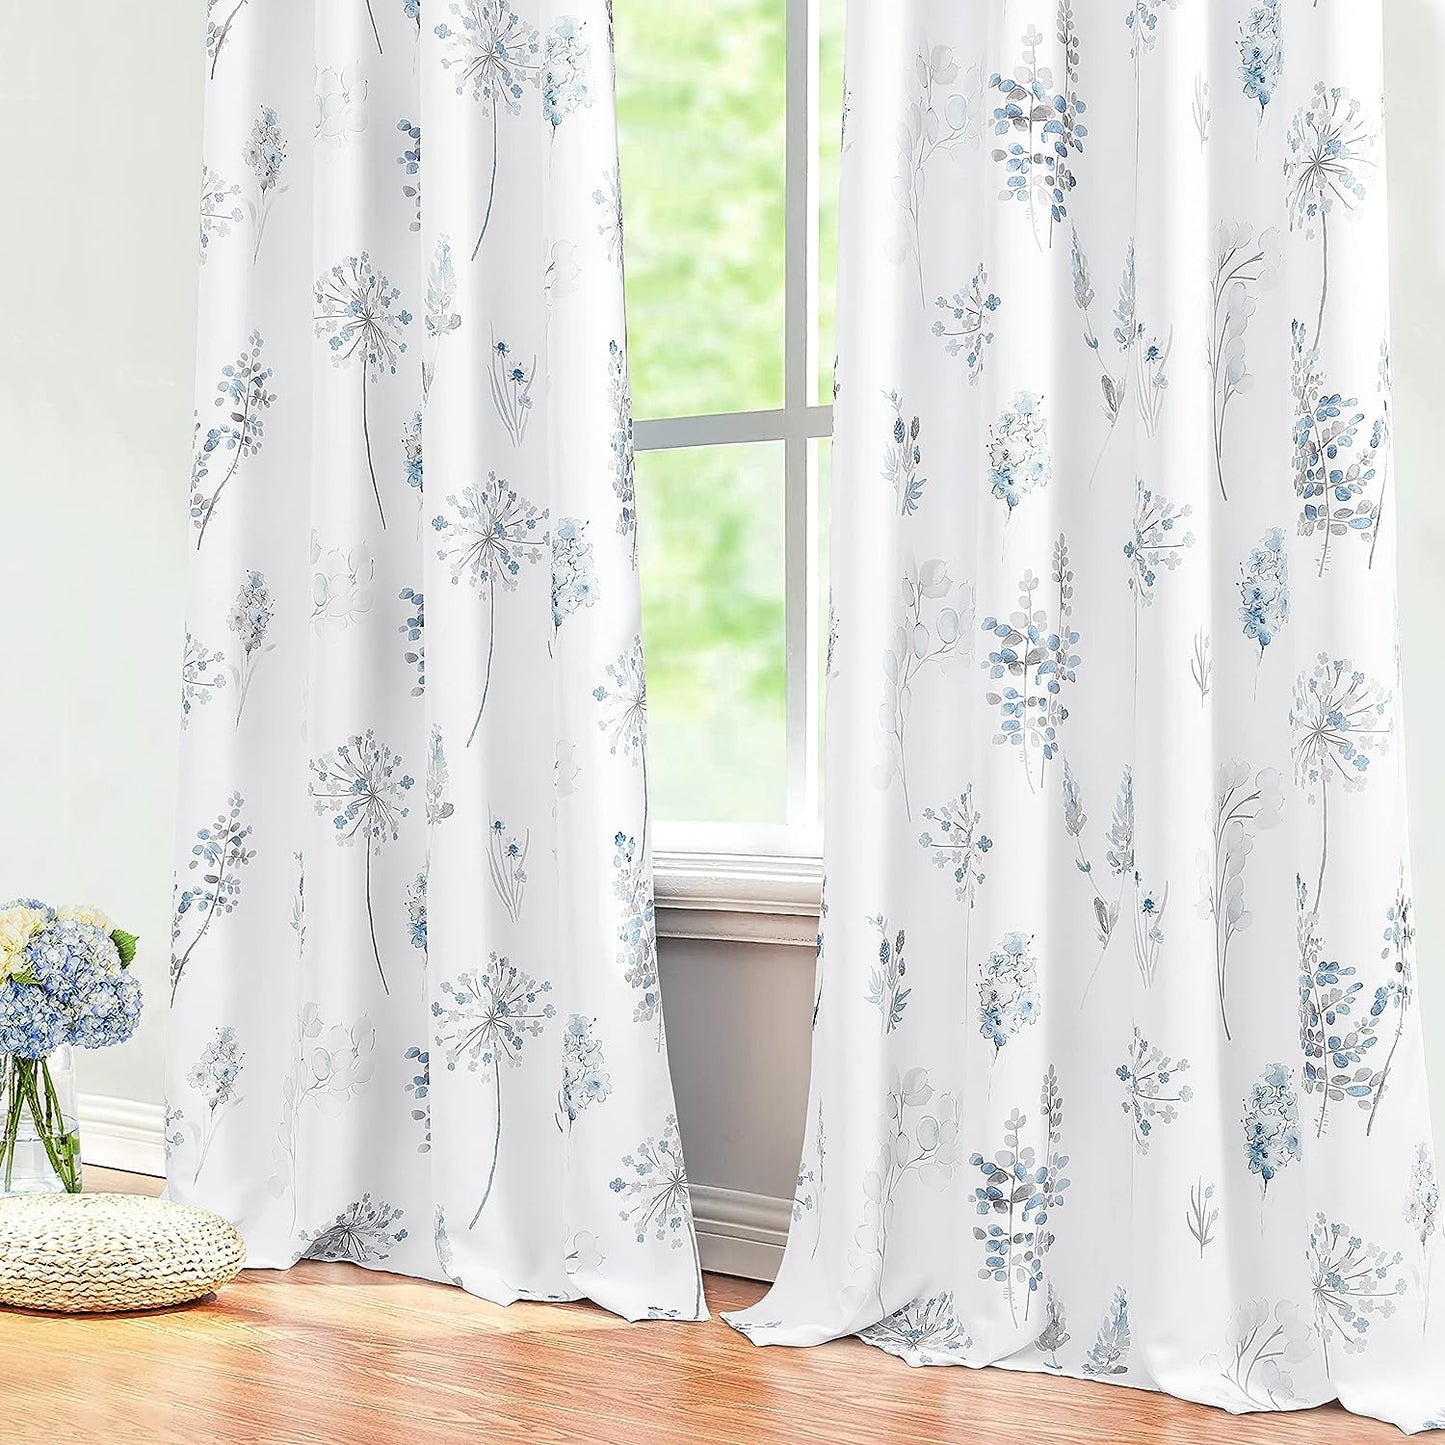 XTMYI 63 Inch Length Sage Green Window Curtains for Bedroom 2 Panels,Room Darkening Watercolor Floral Leaves 80% Blackout Flowered Printed Curtains for Living Room with Grommet,1 Pair Set  XTMYI Blue  Grey 52"X84" 